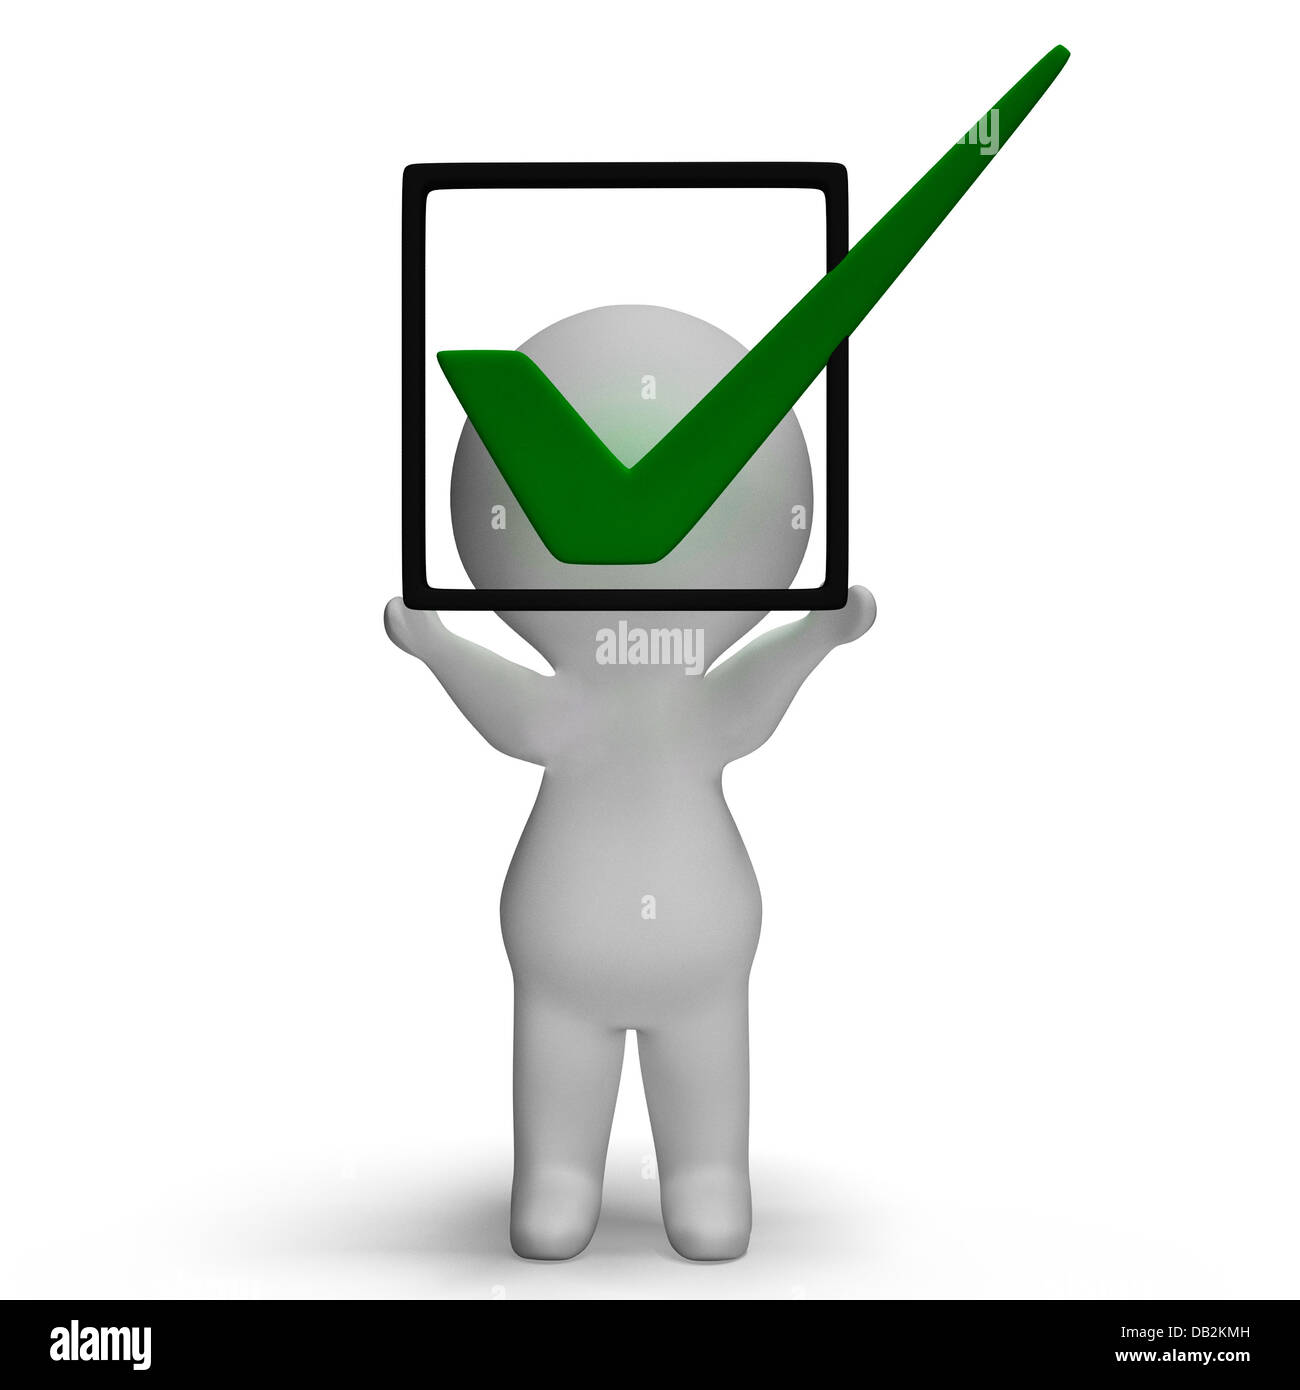 Holding Checkbox Or Check Box Showing Approval Or Checked Stock Photo